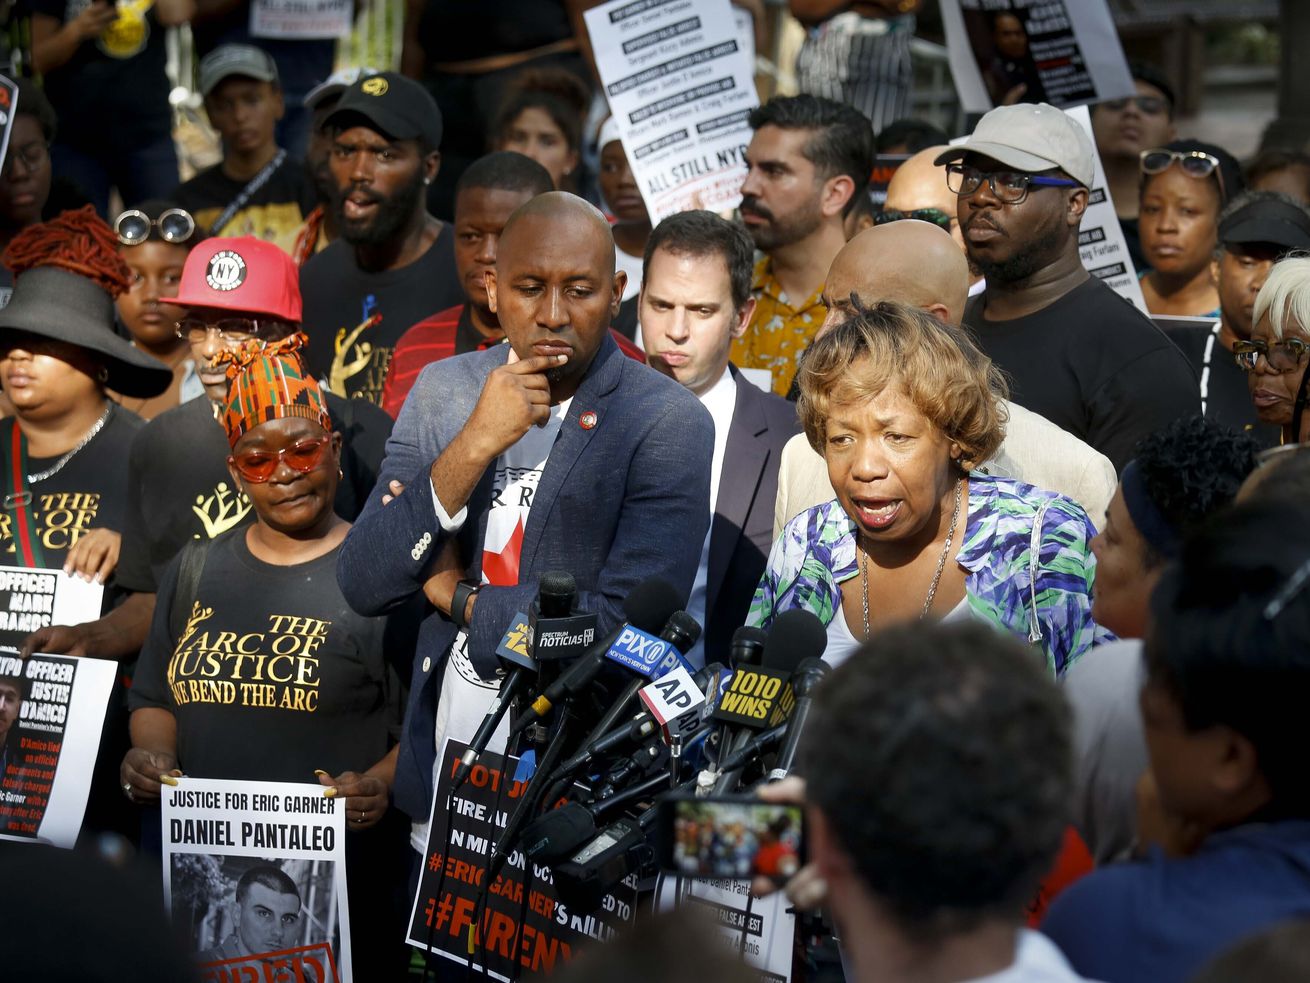 The Officer Who Used A Chokehold On Eric Garner Was Fired But The